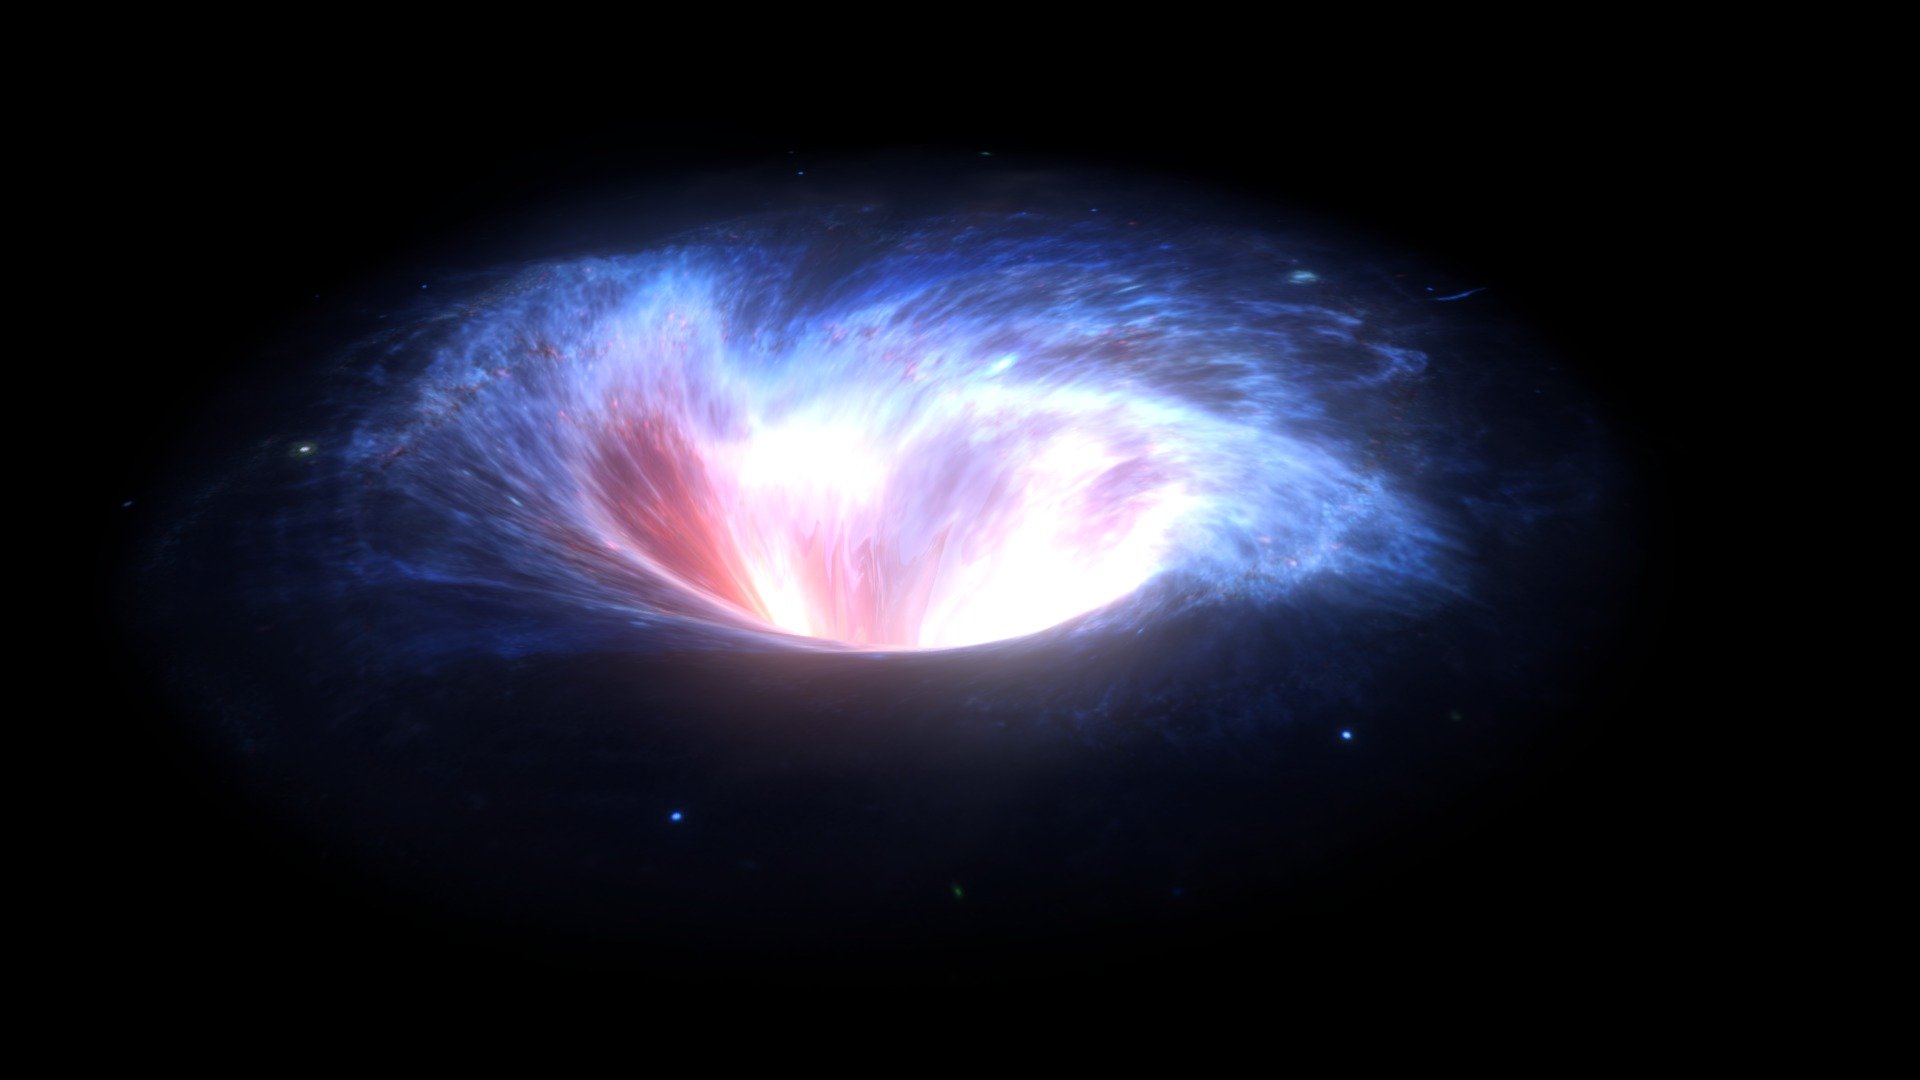 Animated Galaxy - Portal - Wormhole - blackhole.

other eptimized offects in this collection:  https://skfb.ly/oQvyS - Galaxy Space Portal Black Hole - Buy Royalty Free 3D model by tamminen 3d model